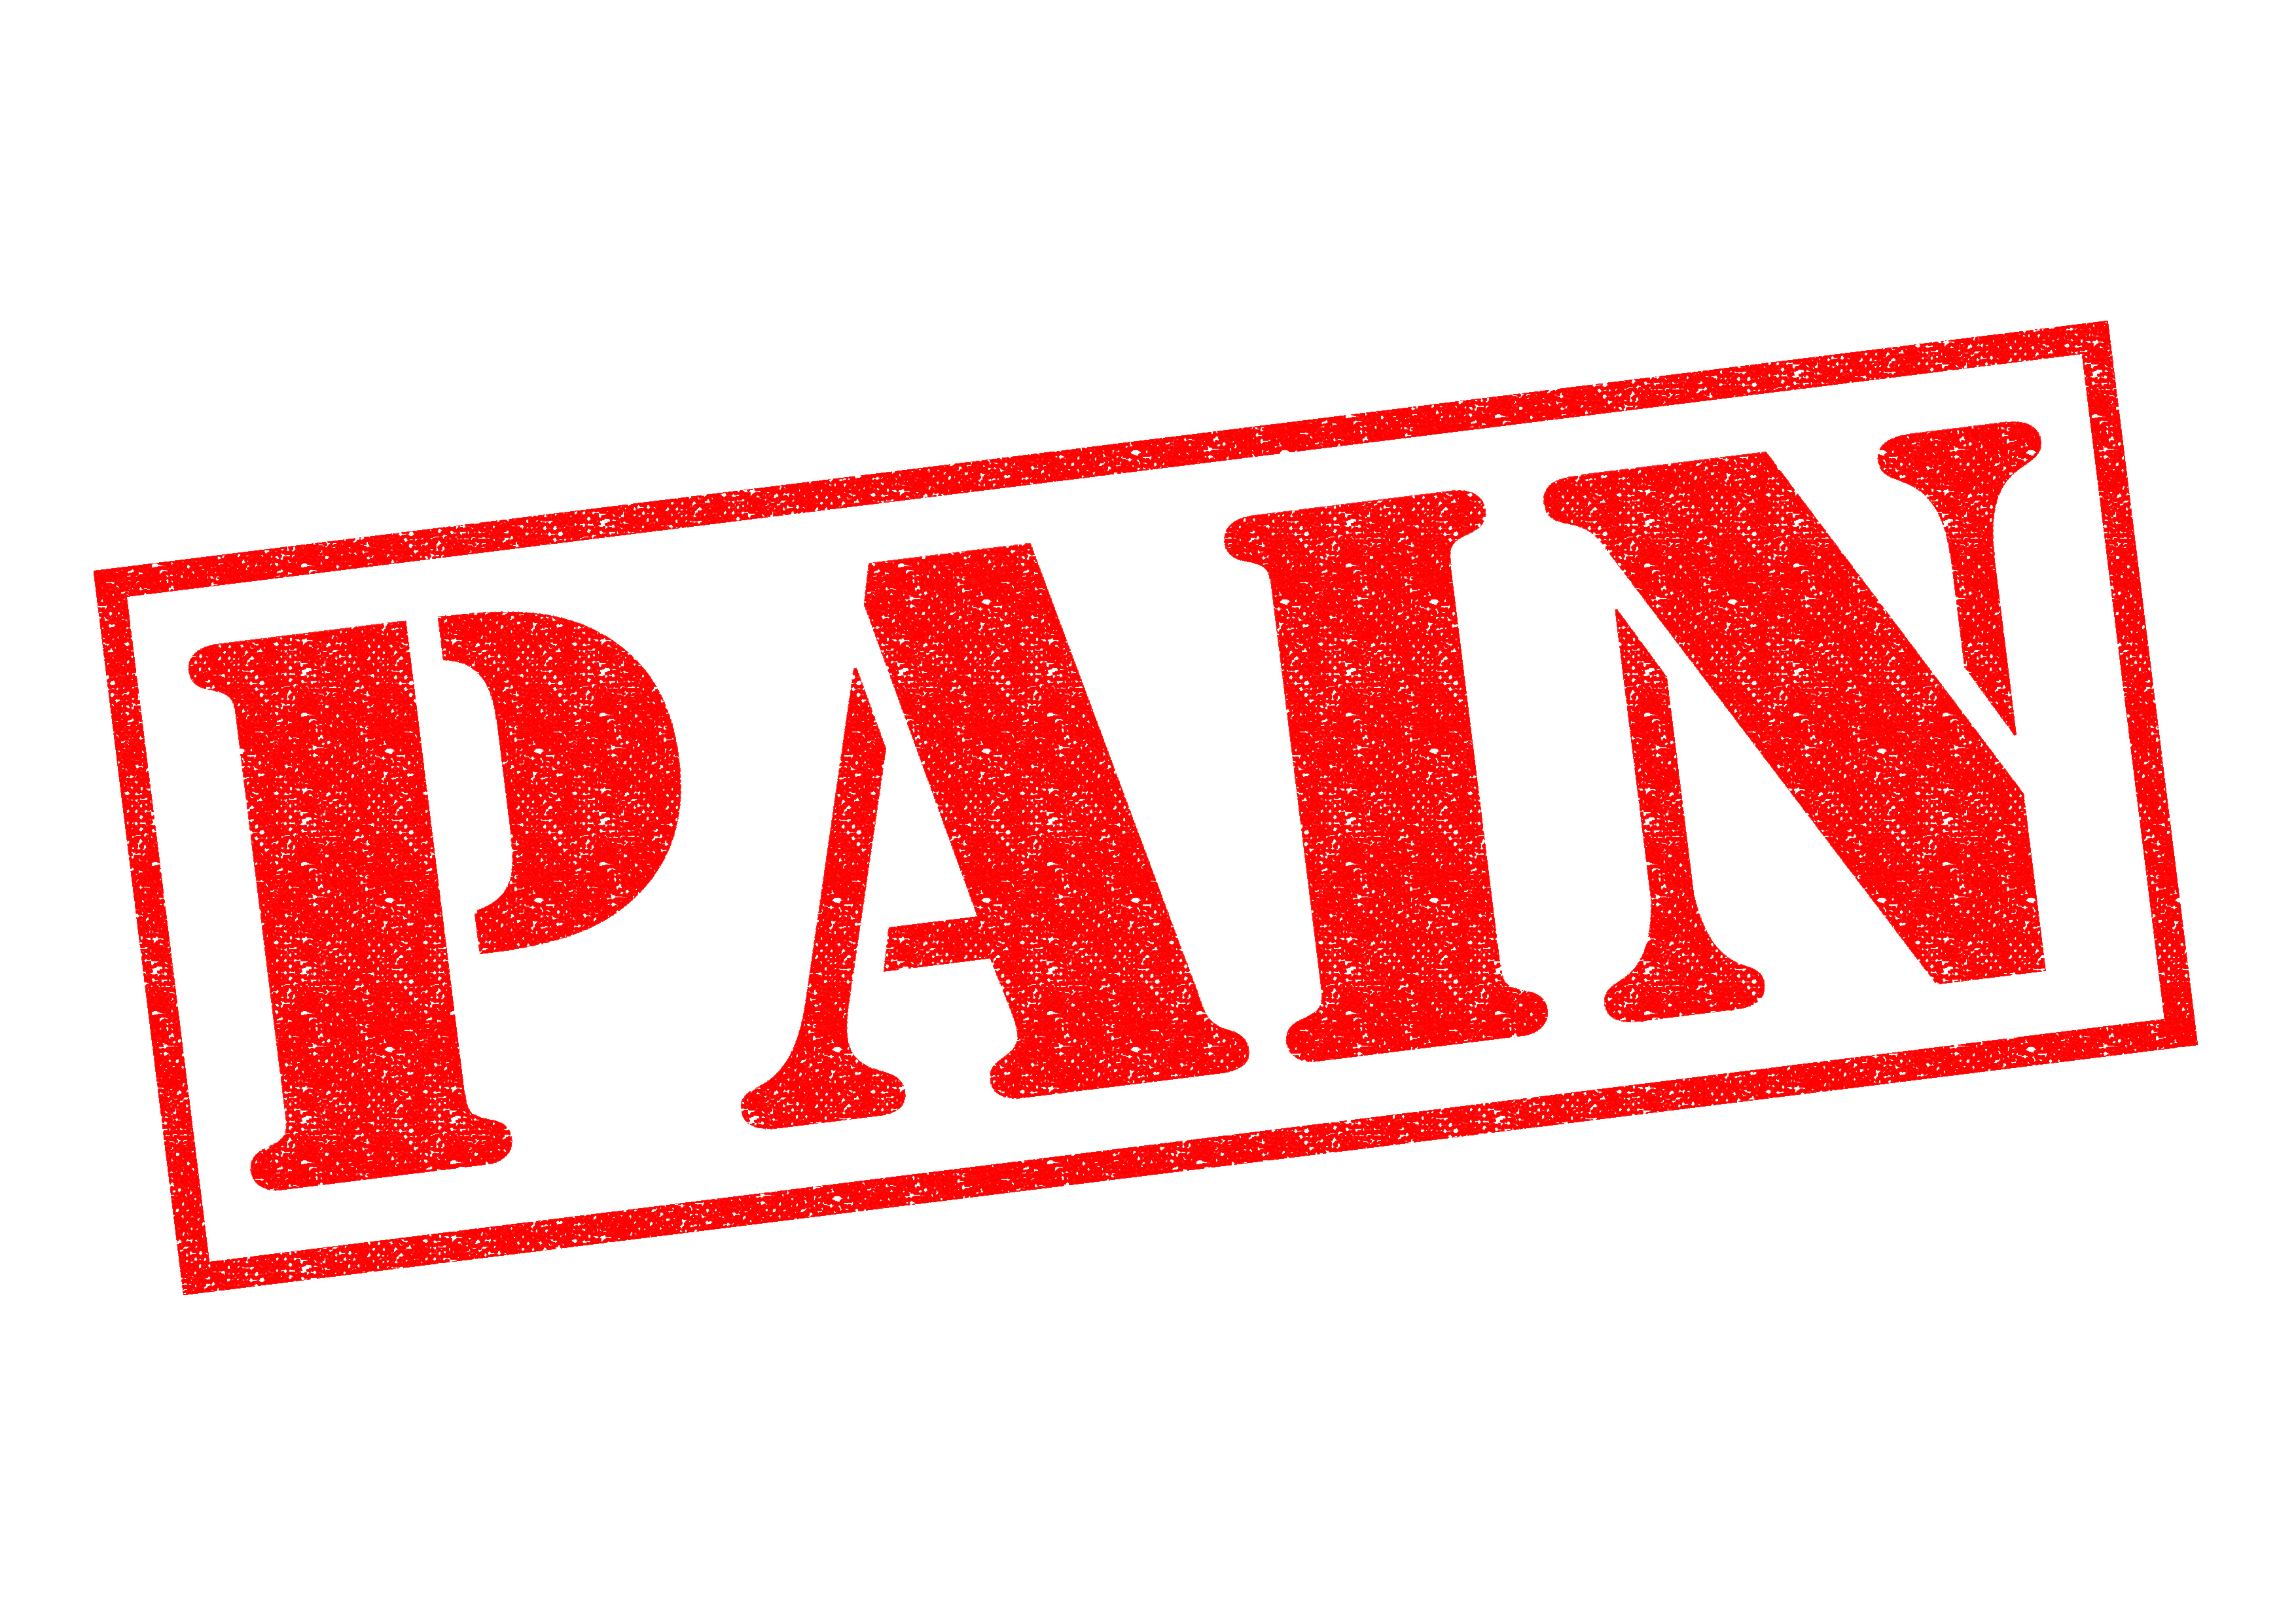 PAIN red Rubber Stamp over a white background.